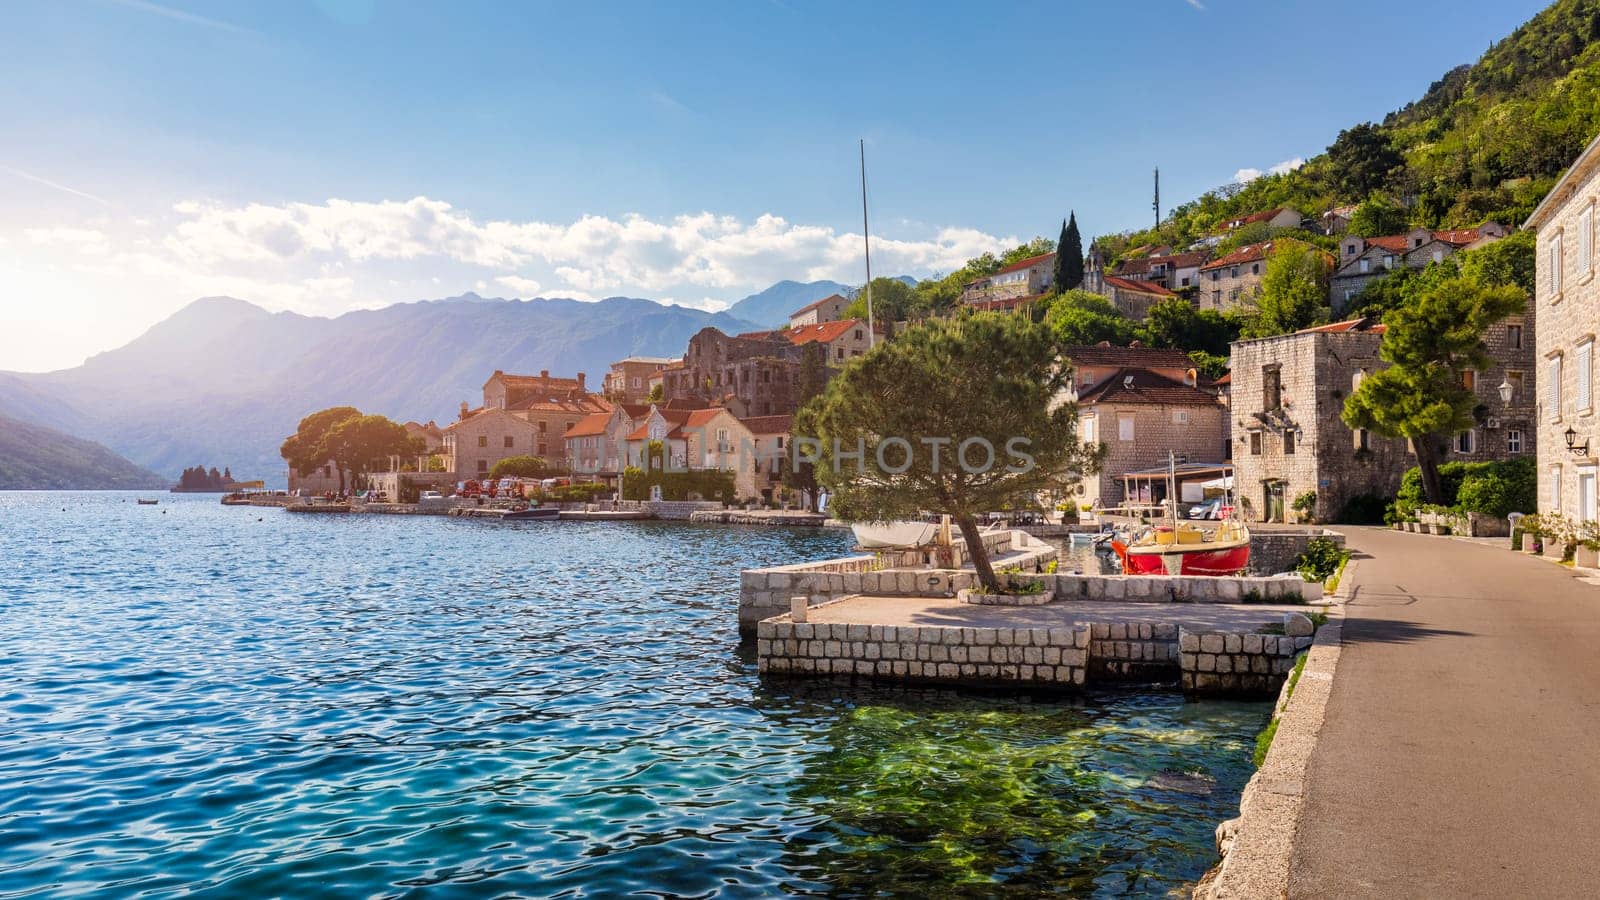 View of the historic town of Perast at famous Bay of Kotor on a beautiful sunny day with blue sky and clouds in summer, Montenegro. Historic city of Perast at Bay of Kotor in summer, Montenegro.